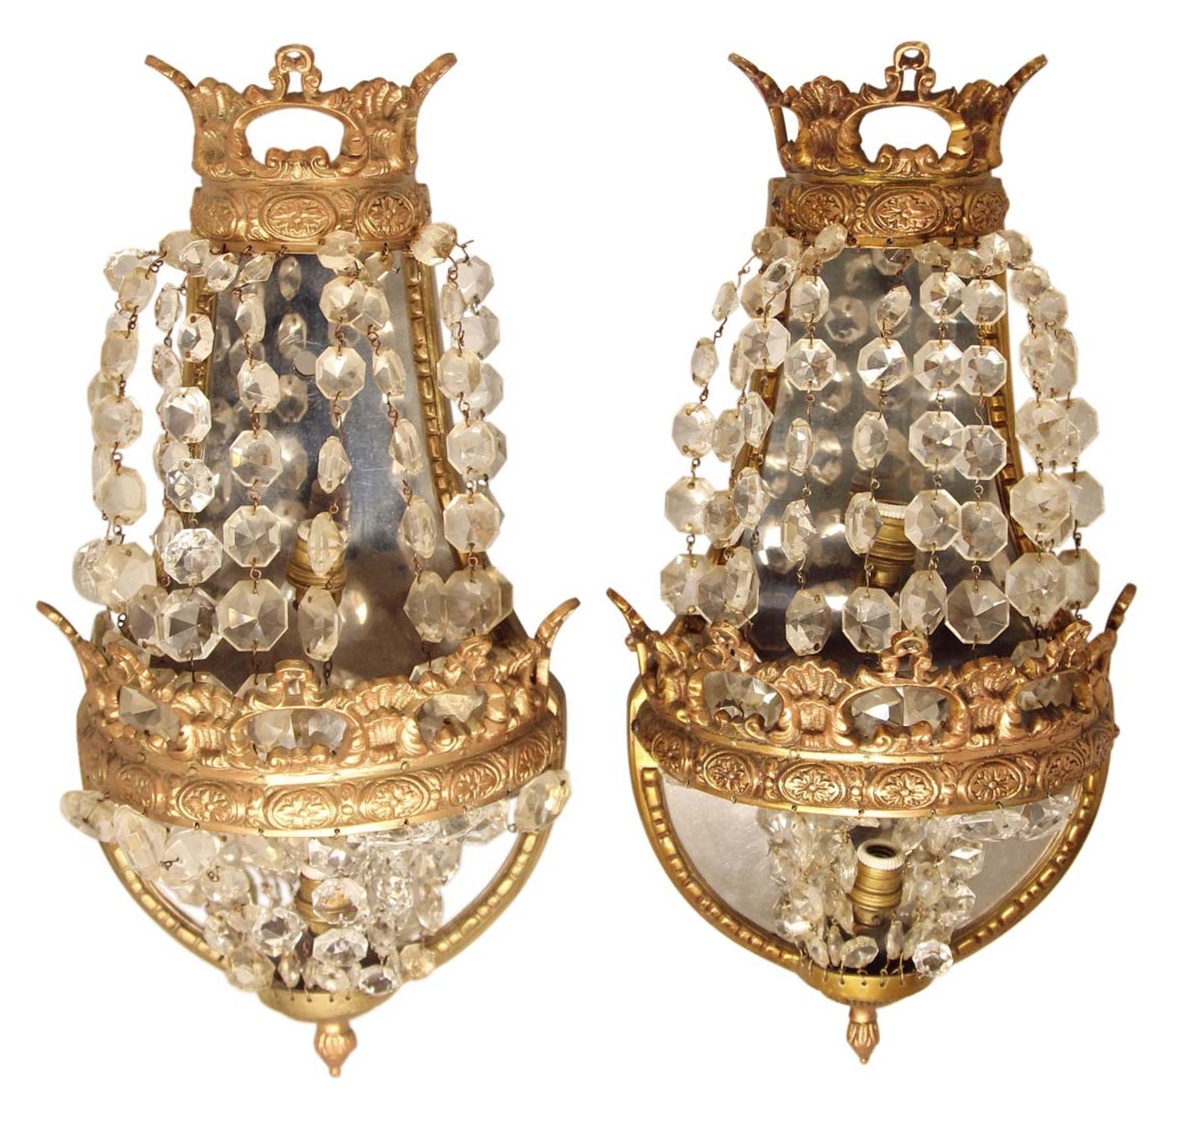 Pair of Antique Mirrored Crystal Wall Sconces | Olde Good Things